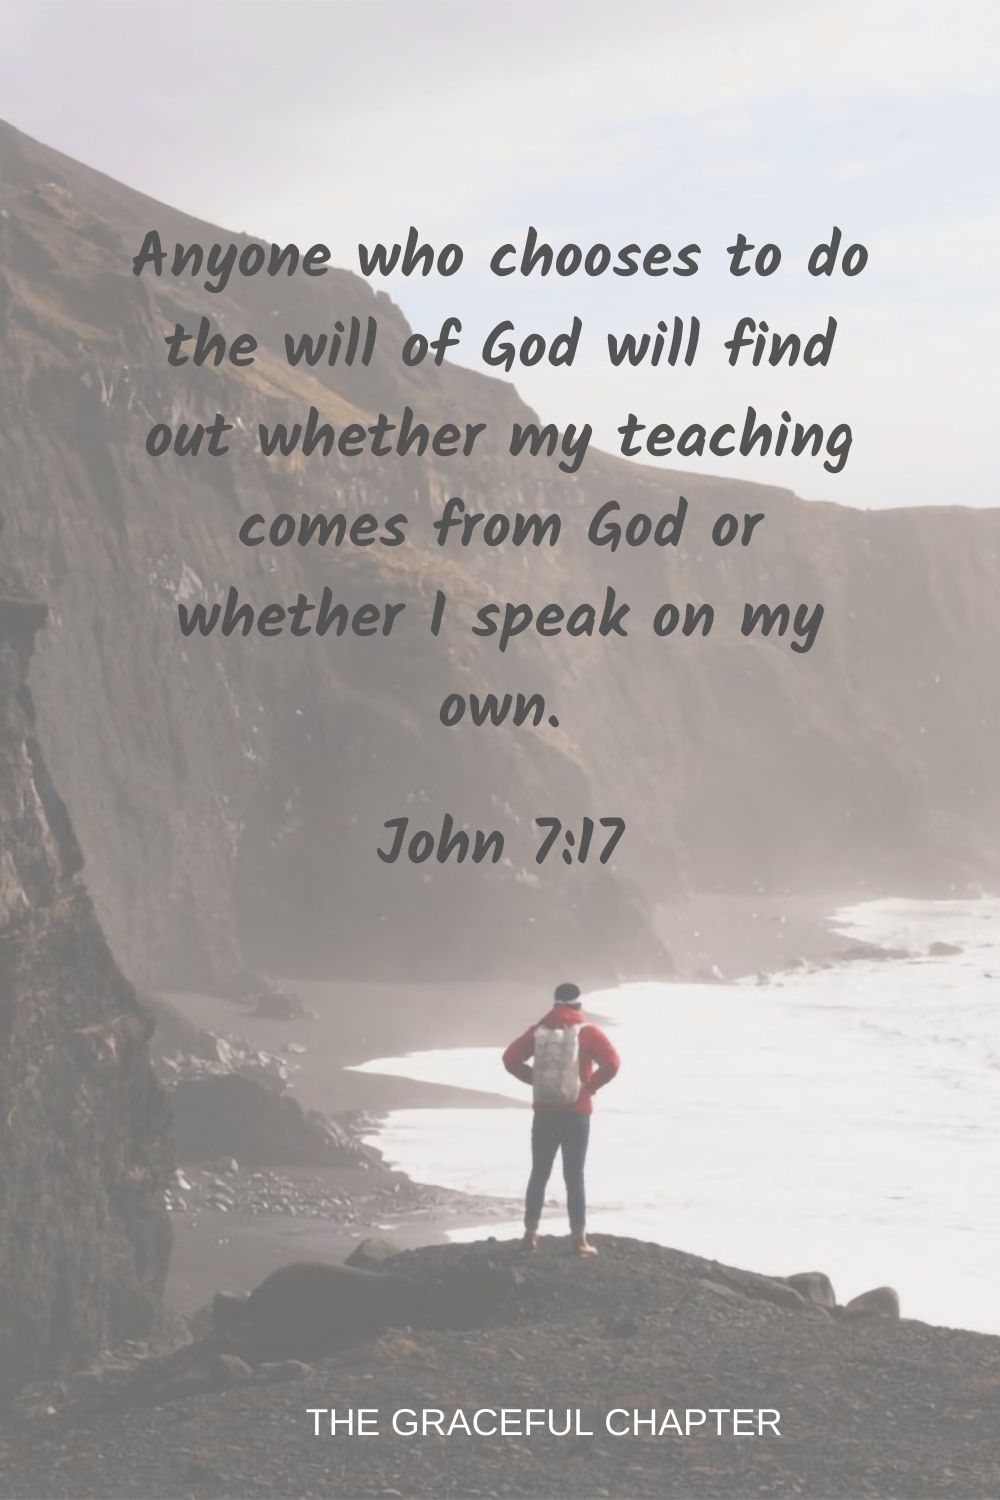 Anyone who chooses to do the will of God will find out whether my teaching comes from God or whether I speak on my own. John 7:17